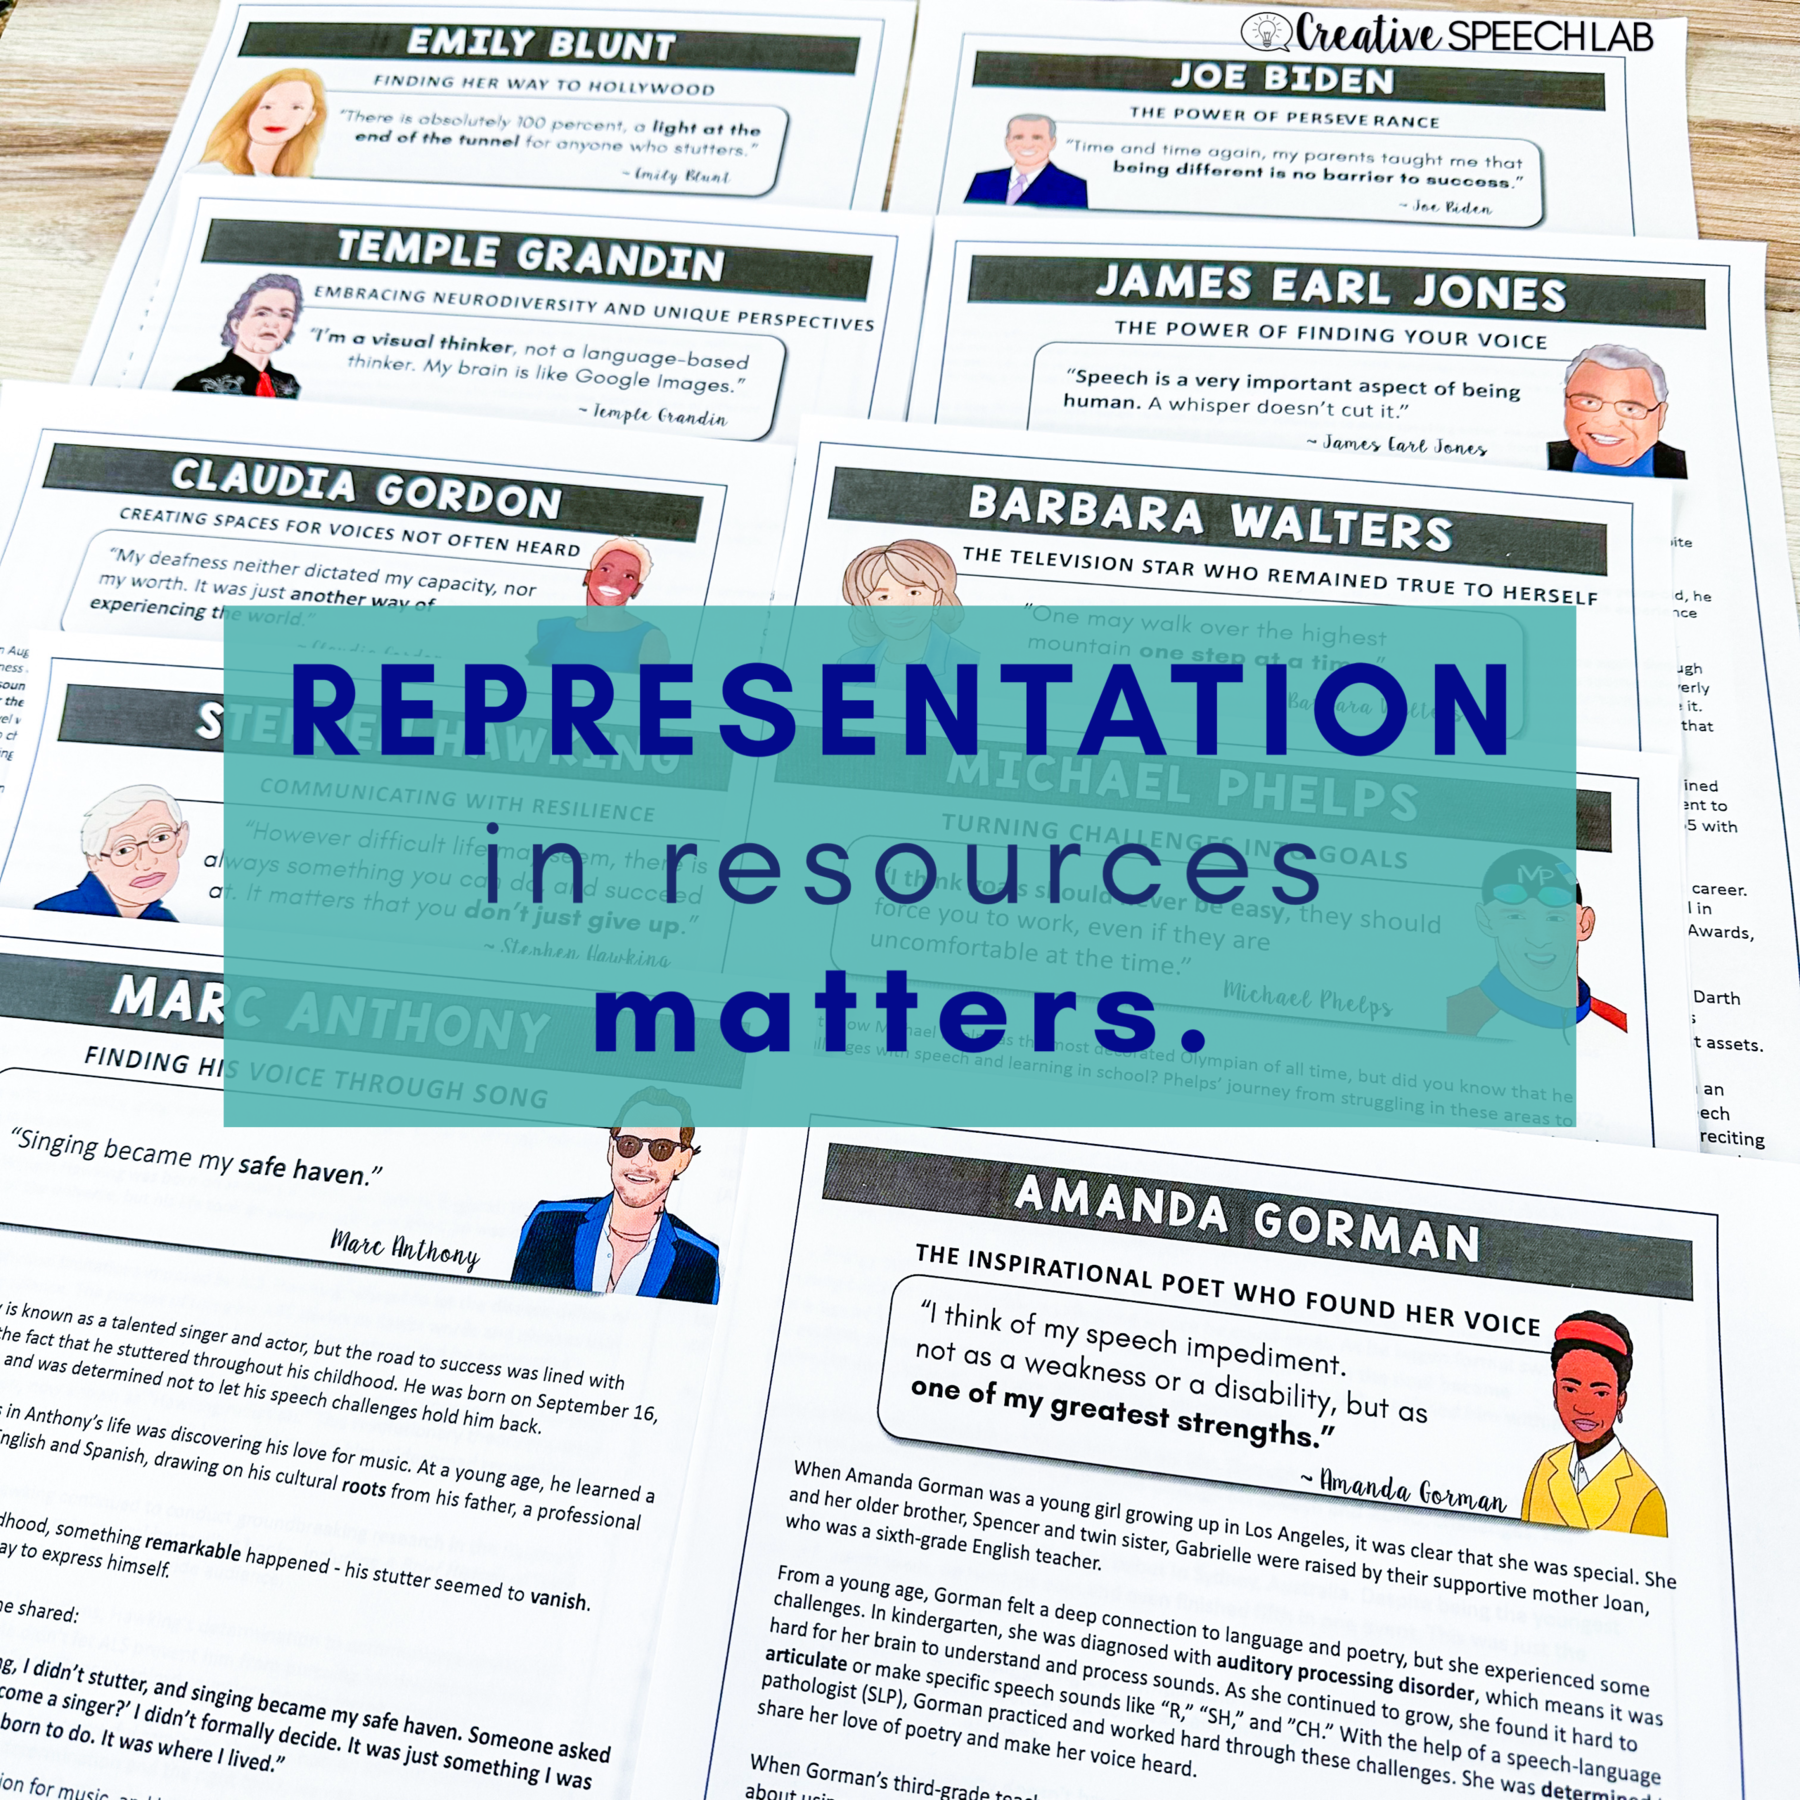 Photo of nonfiction texts featuring celebrities with speech and language differences. The text on the image reads "Representation in resources matters"